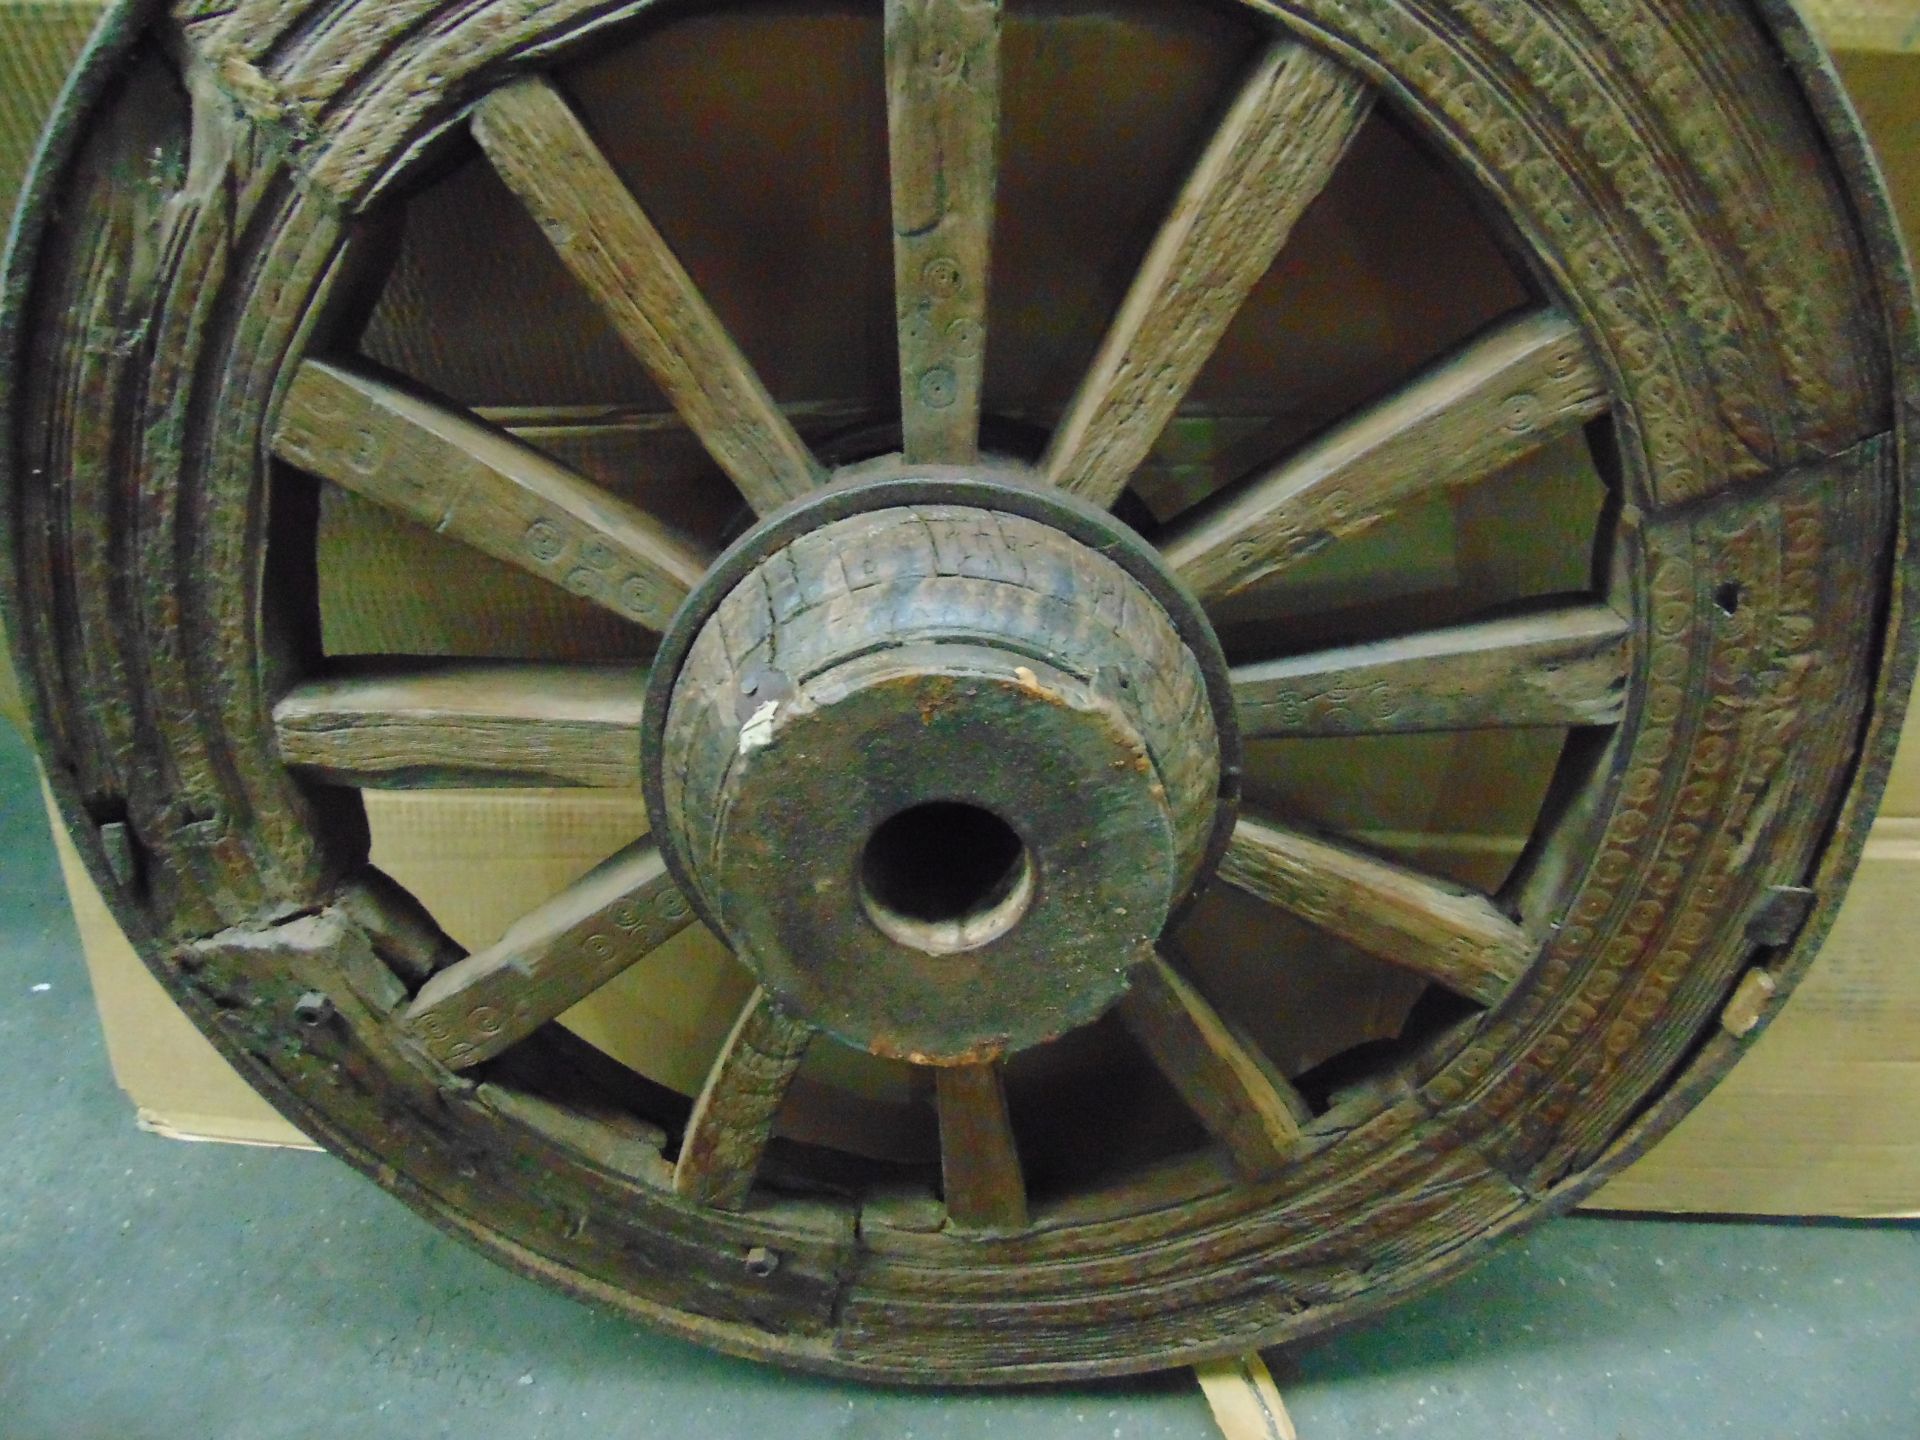 VERY RARE ANTIQUE WOODEN WAGON WHEEL WITH STEEL RIM, WOODEN SPOKES - 85 CMS - Image 6 of 6